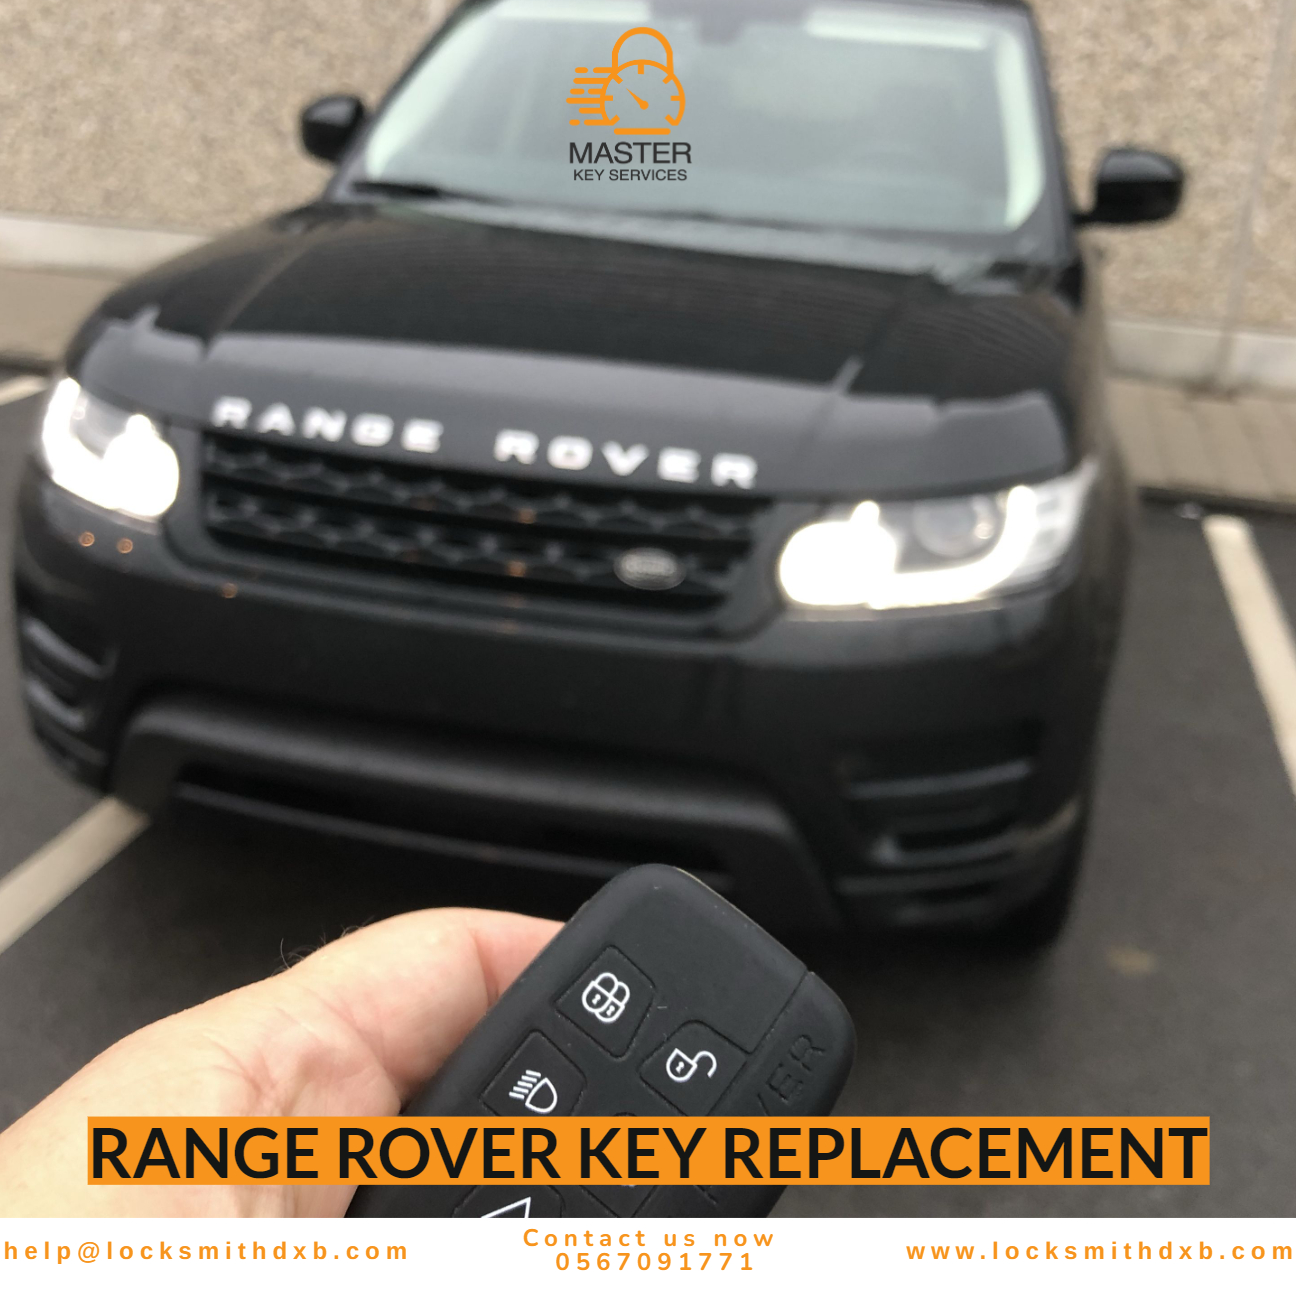 Range rover key replacement